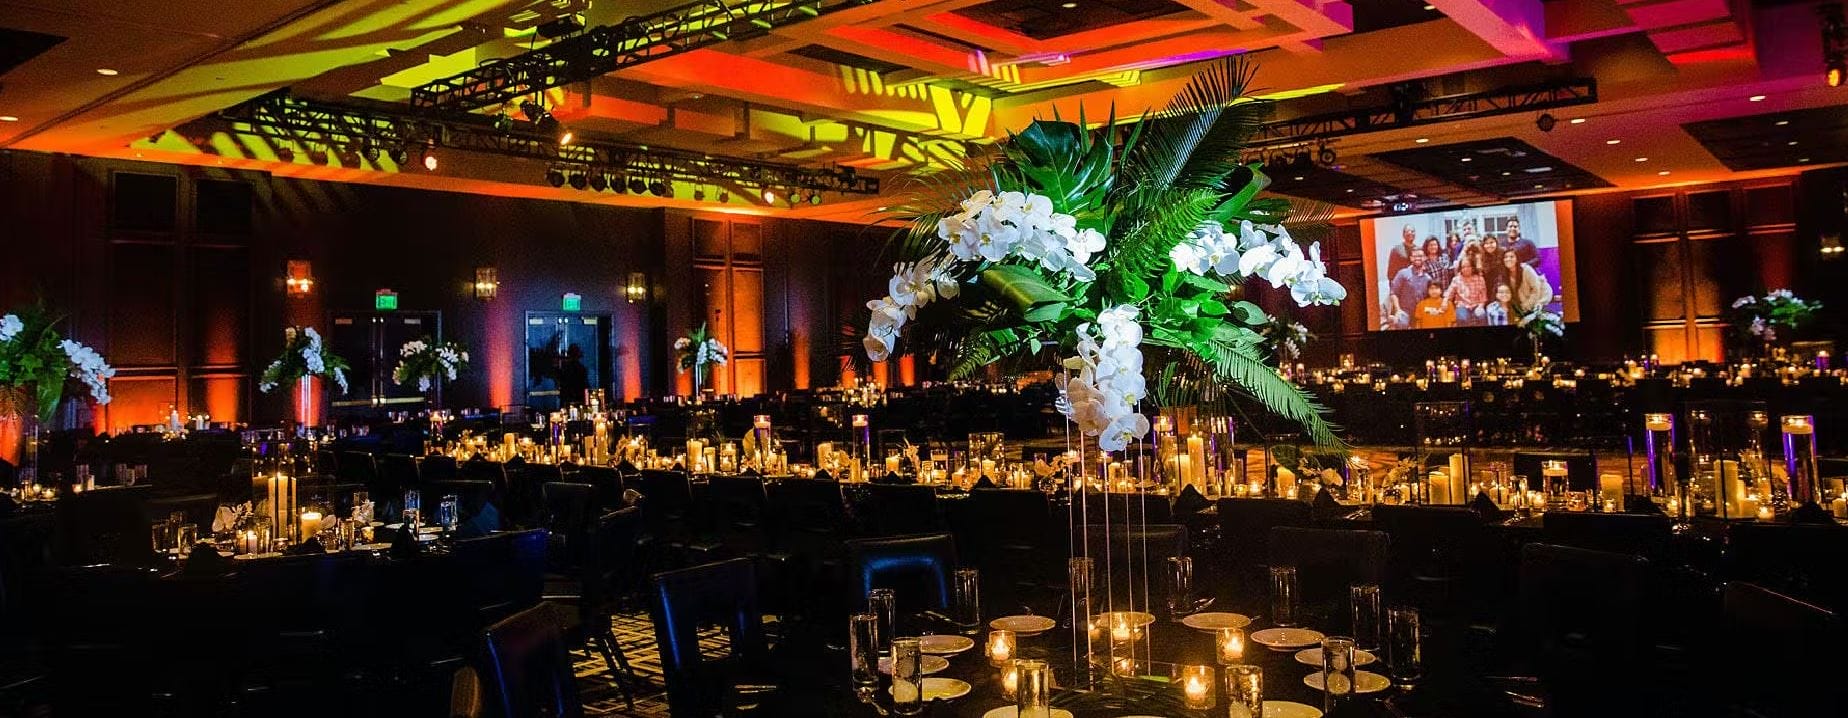 Candles and floral centerpieces line tables inside the Rivers Casino Portsmouth event space.